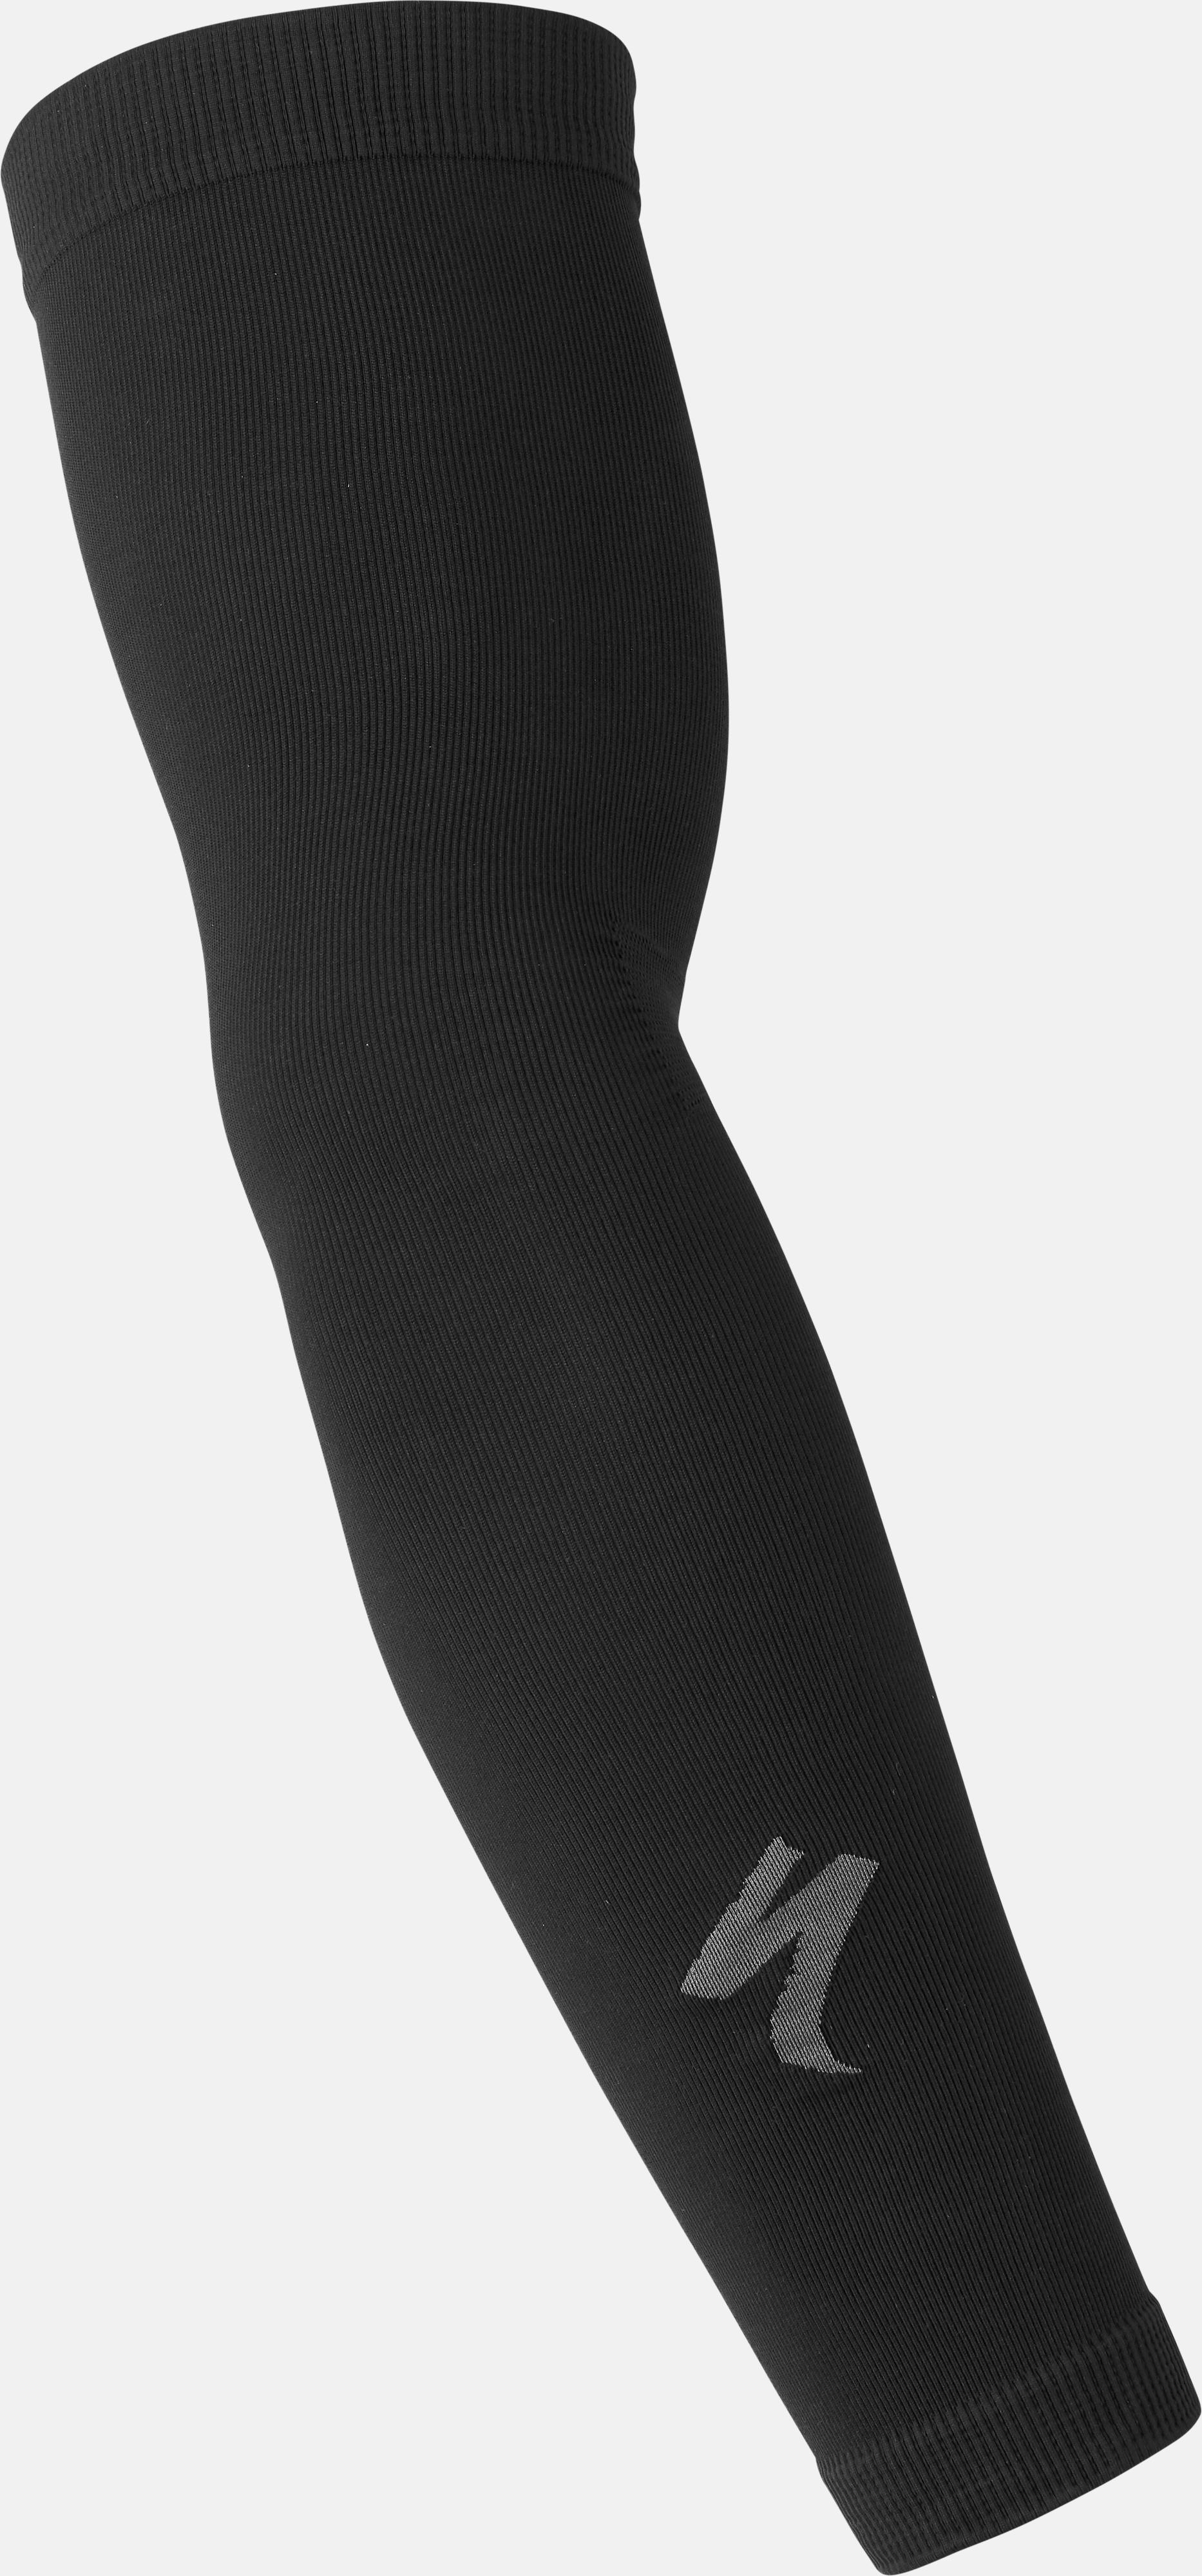 Specialized Thermal 2.0 WINTER Reflective Arm Warmers